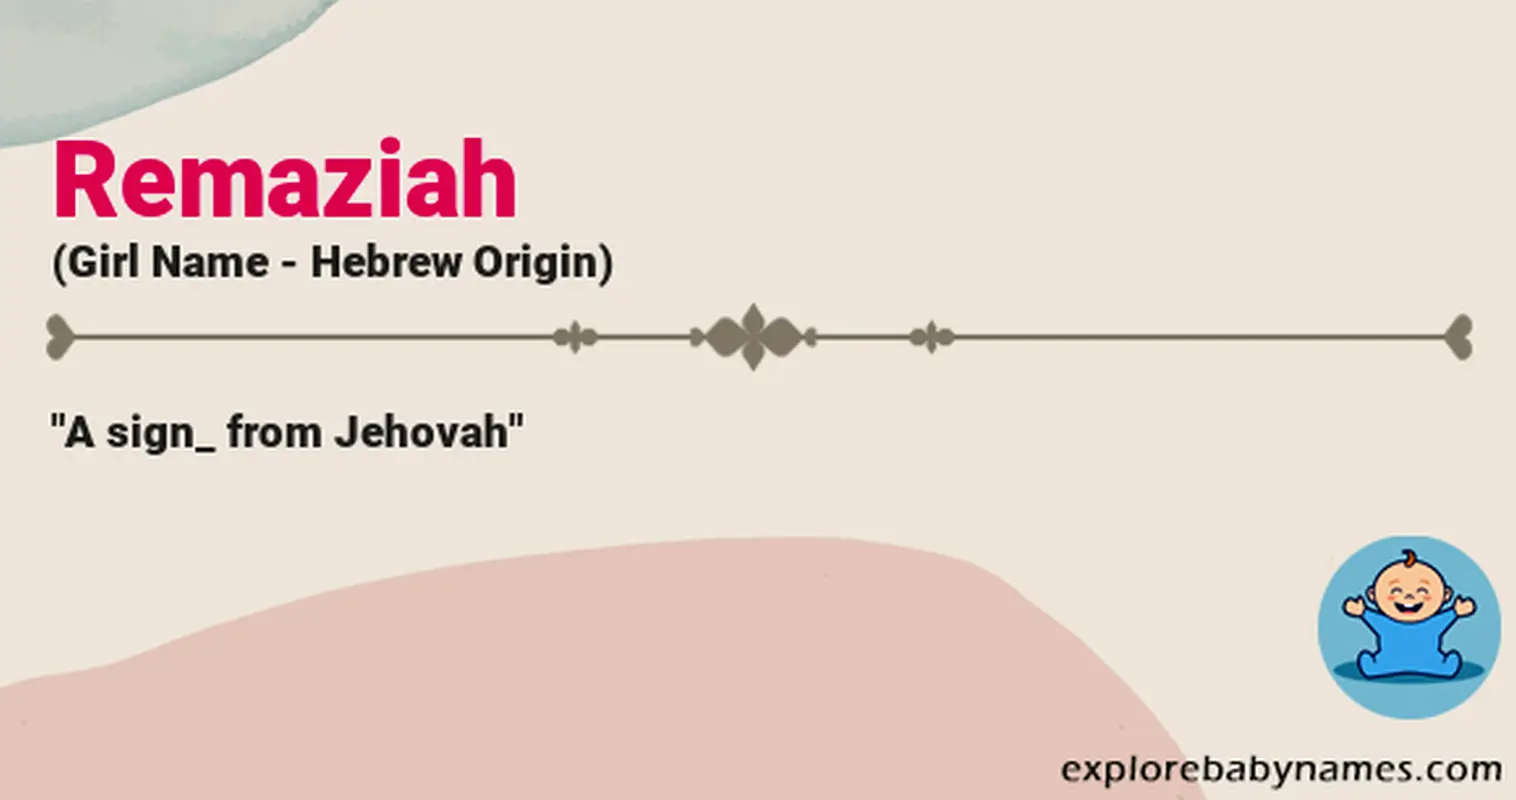 Meaning of Remaziah